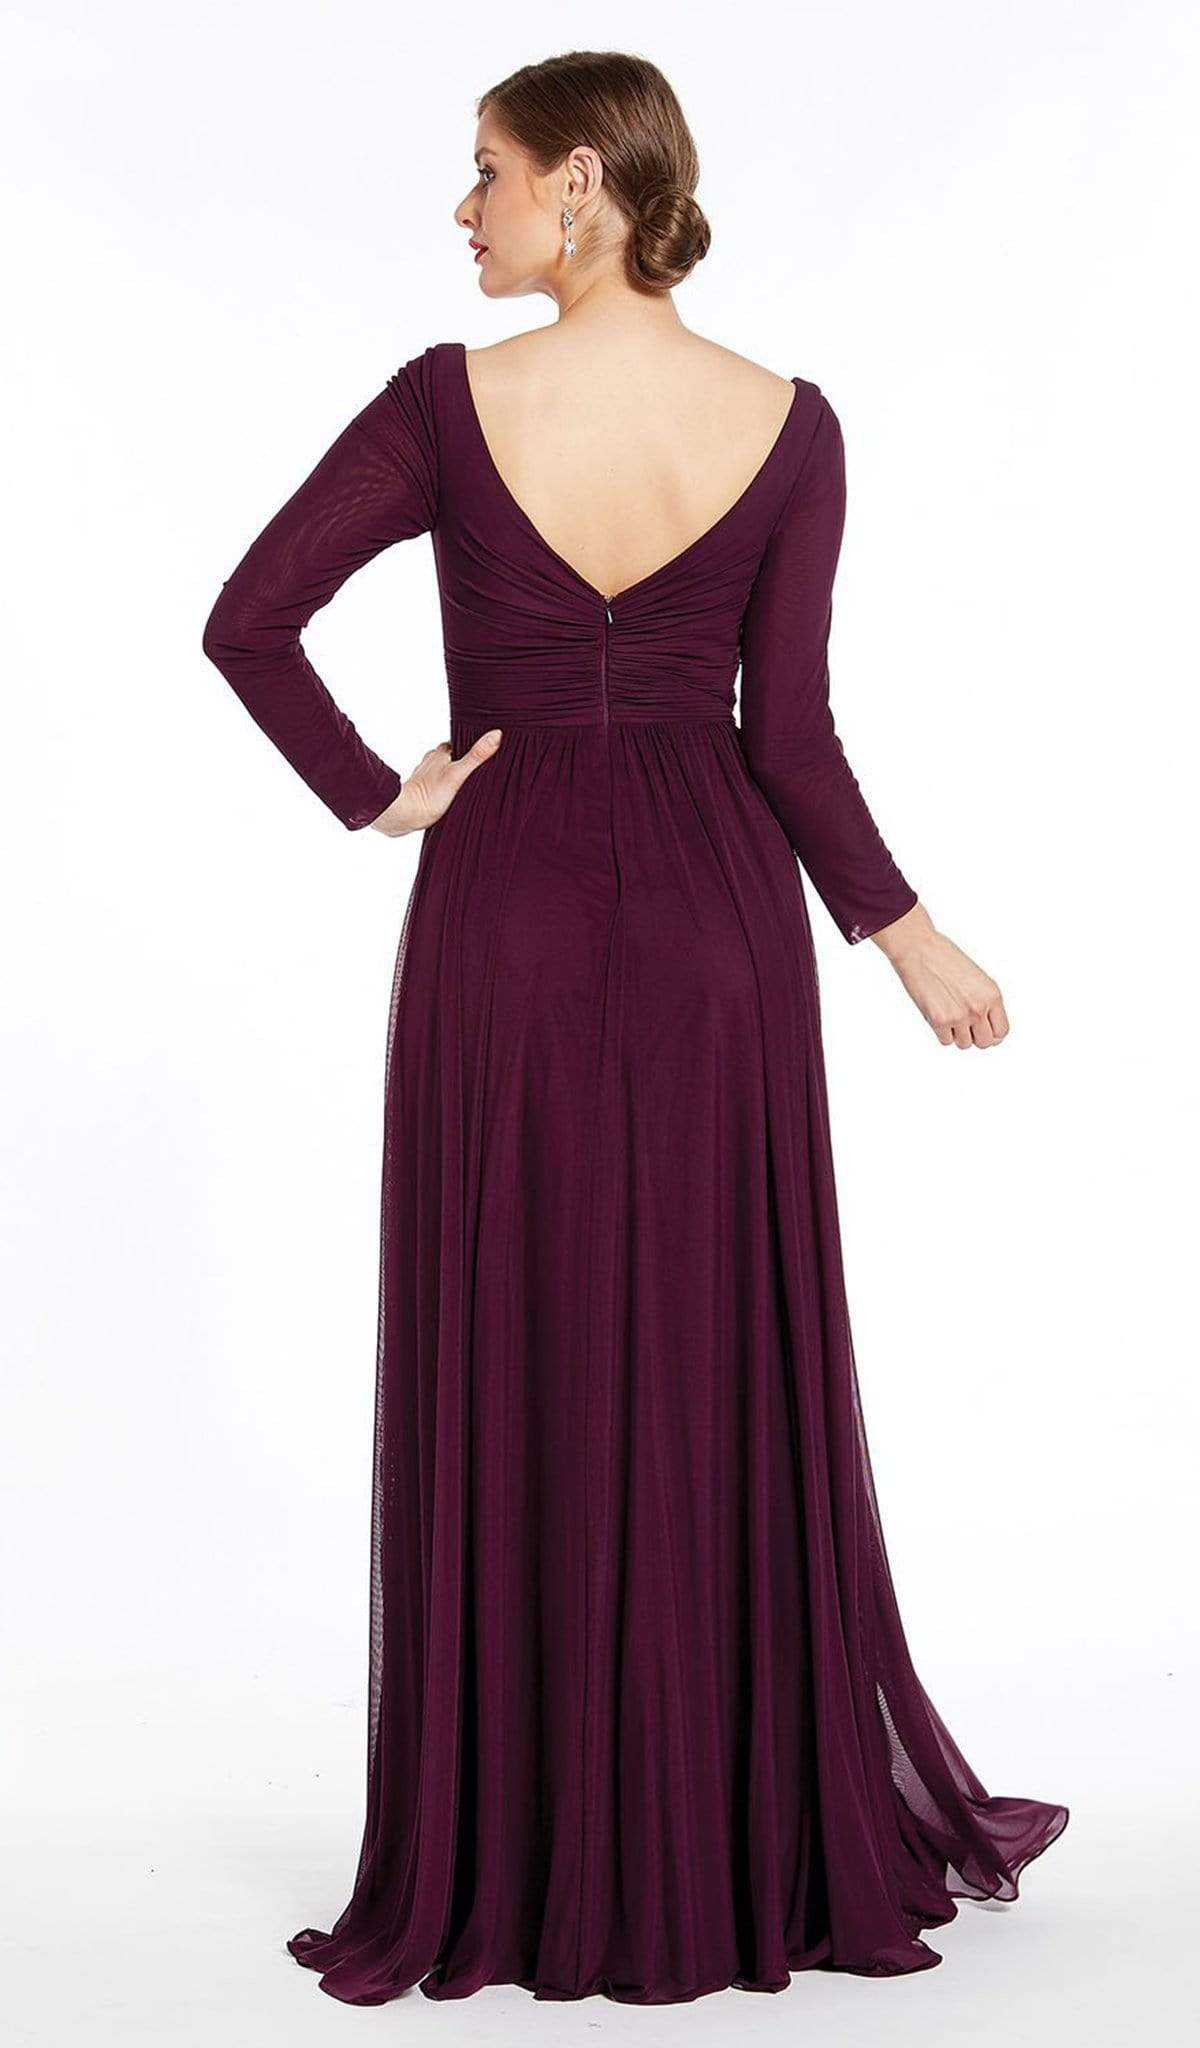 Alyce Paris, Alyce Paris - 27304 Long Sleeves V Neck Jersey Dress with Slit - 2 pc Claret in Size 16 and 20 Available